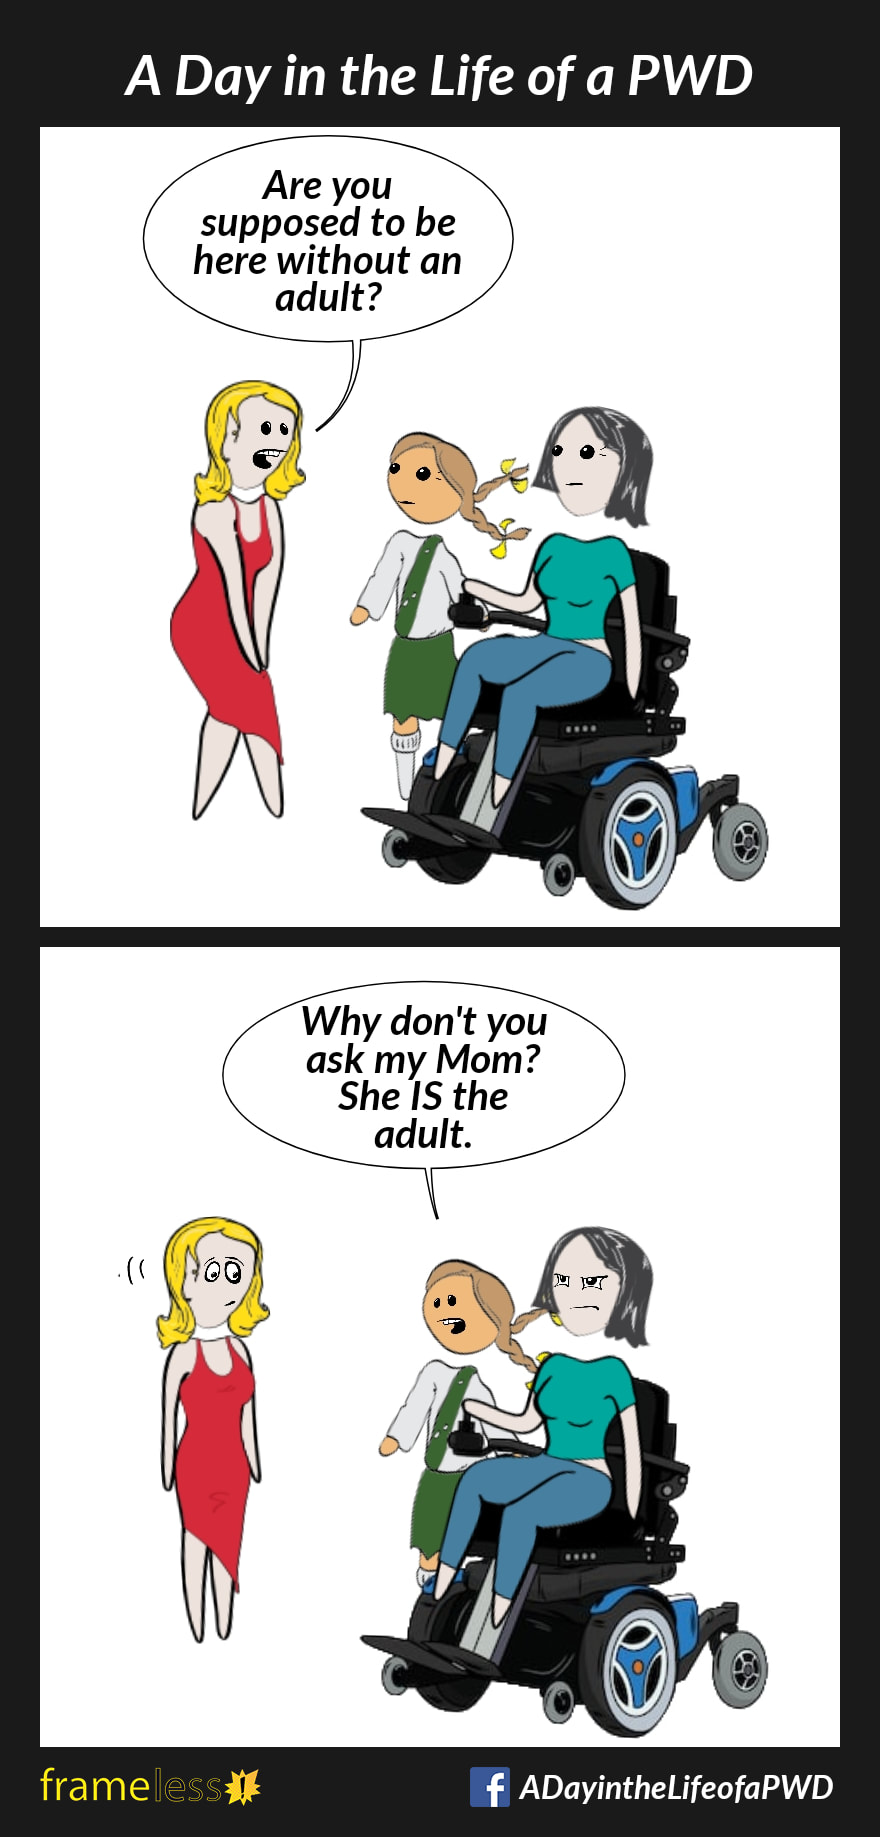 COMIC STRIP 
A Day in the Life of a PWD (Person With a Disability) 

Frame 1:
A woman in a power wheelchair is with her daughter. A stranger approaches. 
STRANGER (to daughter): Are you supposed to be here without an adult?

Frame 2:
DAUGHTER: Why don't you ask my Mom. She IS the adult.